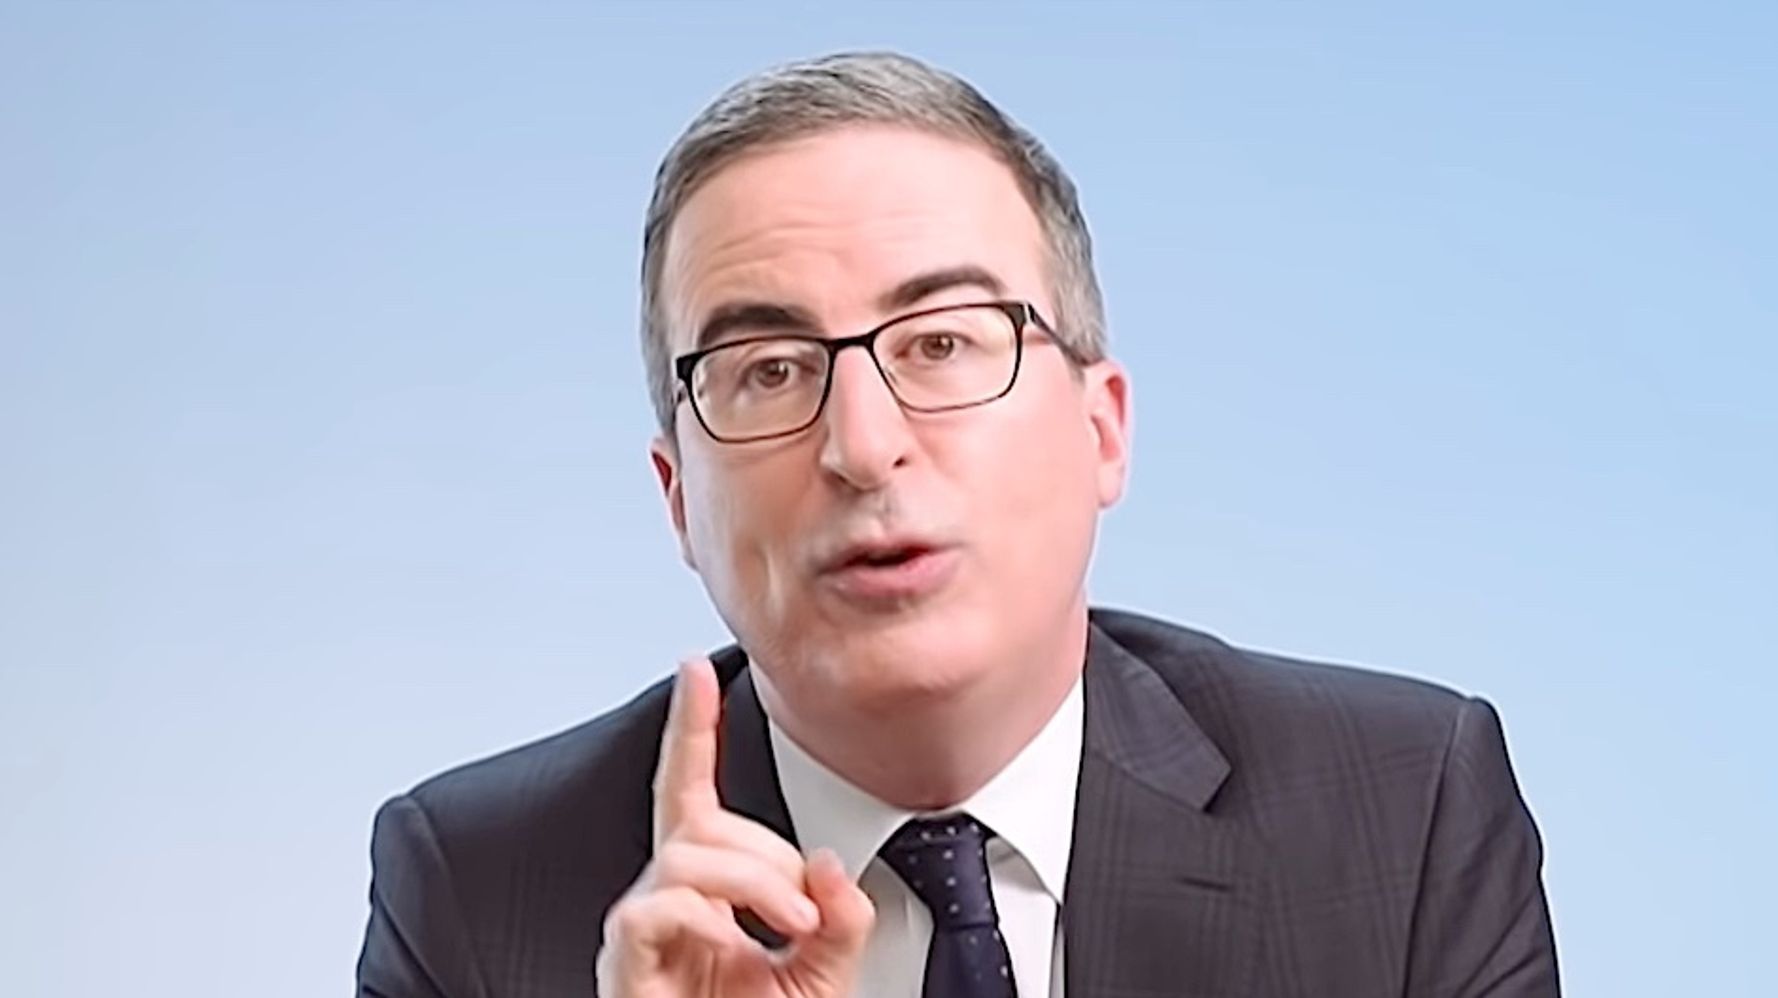 John Oliver Has Some Alarming News For Anyone Who Might Need An Ambulance